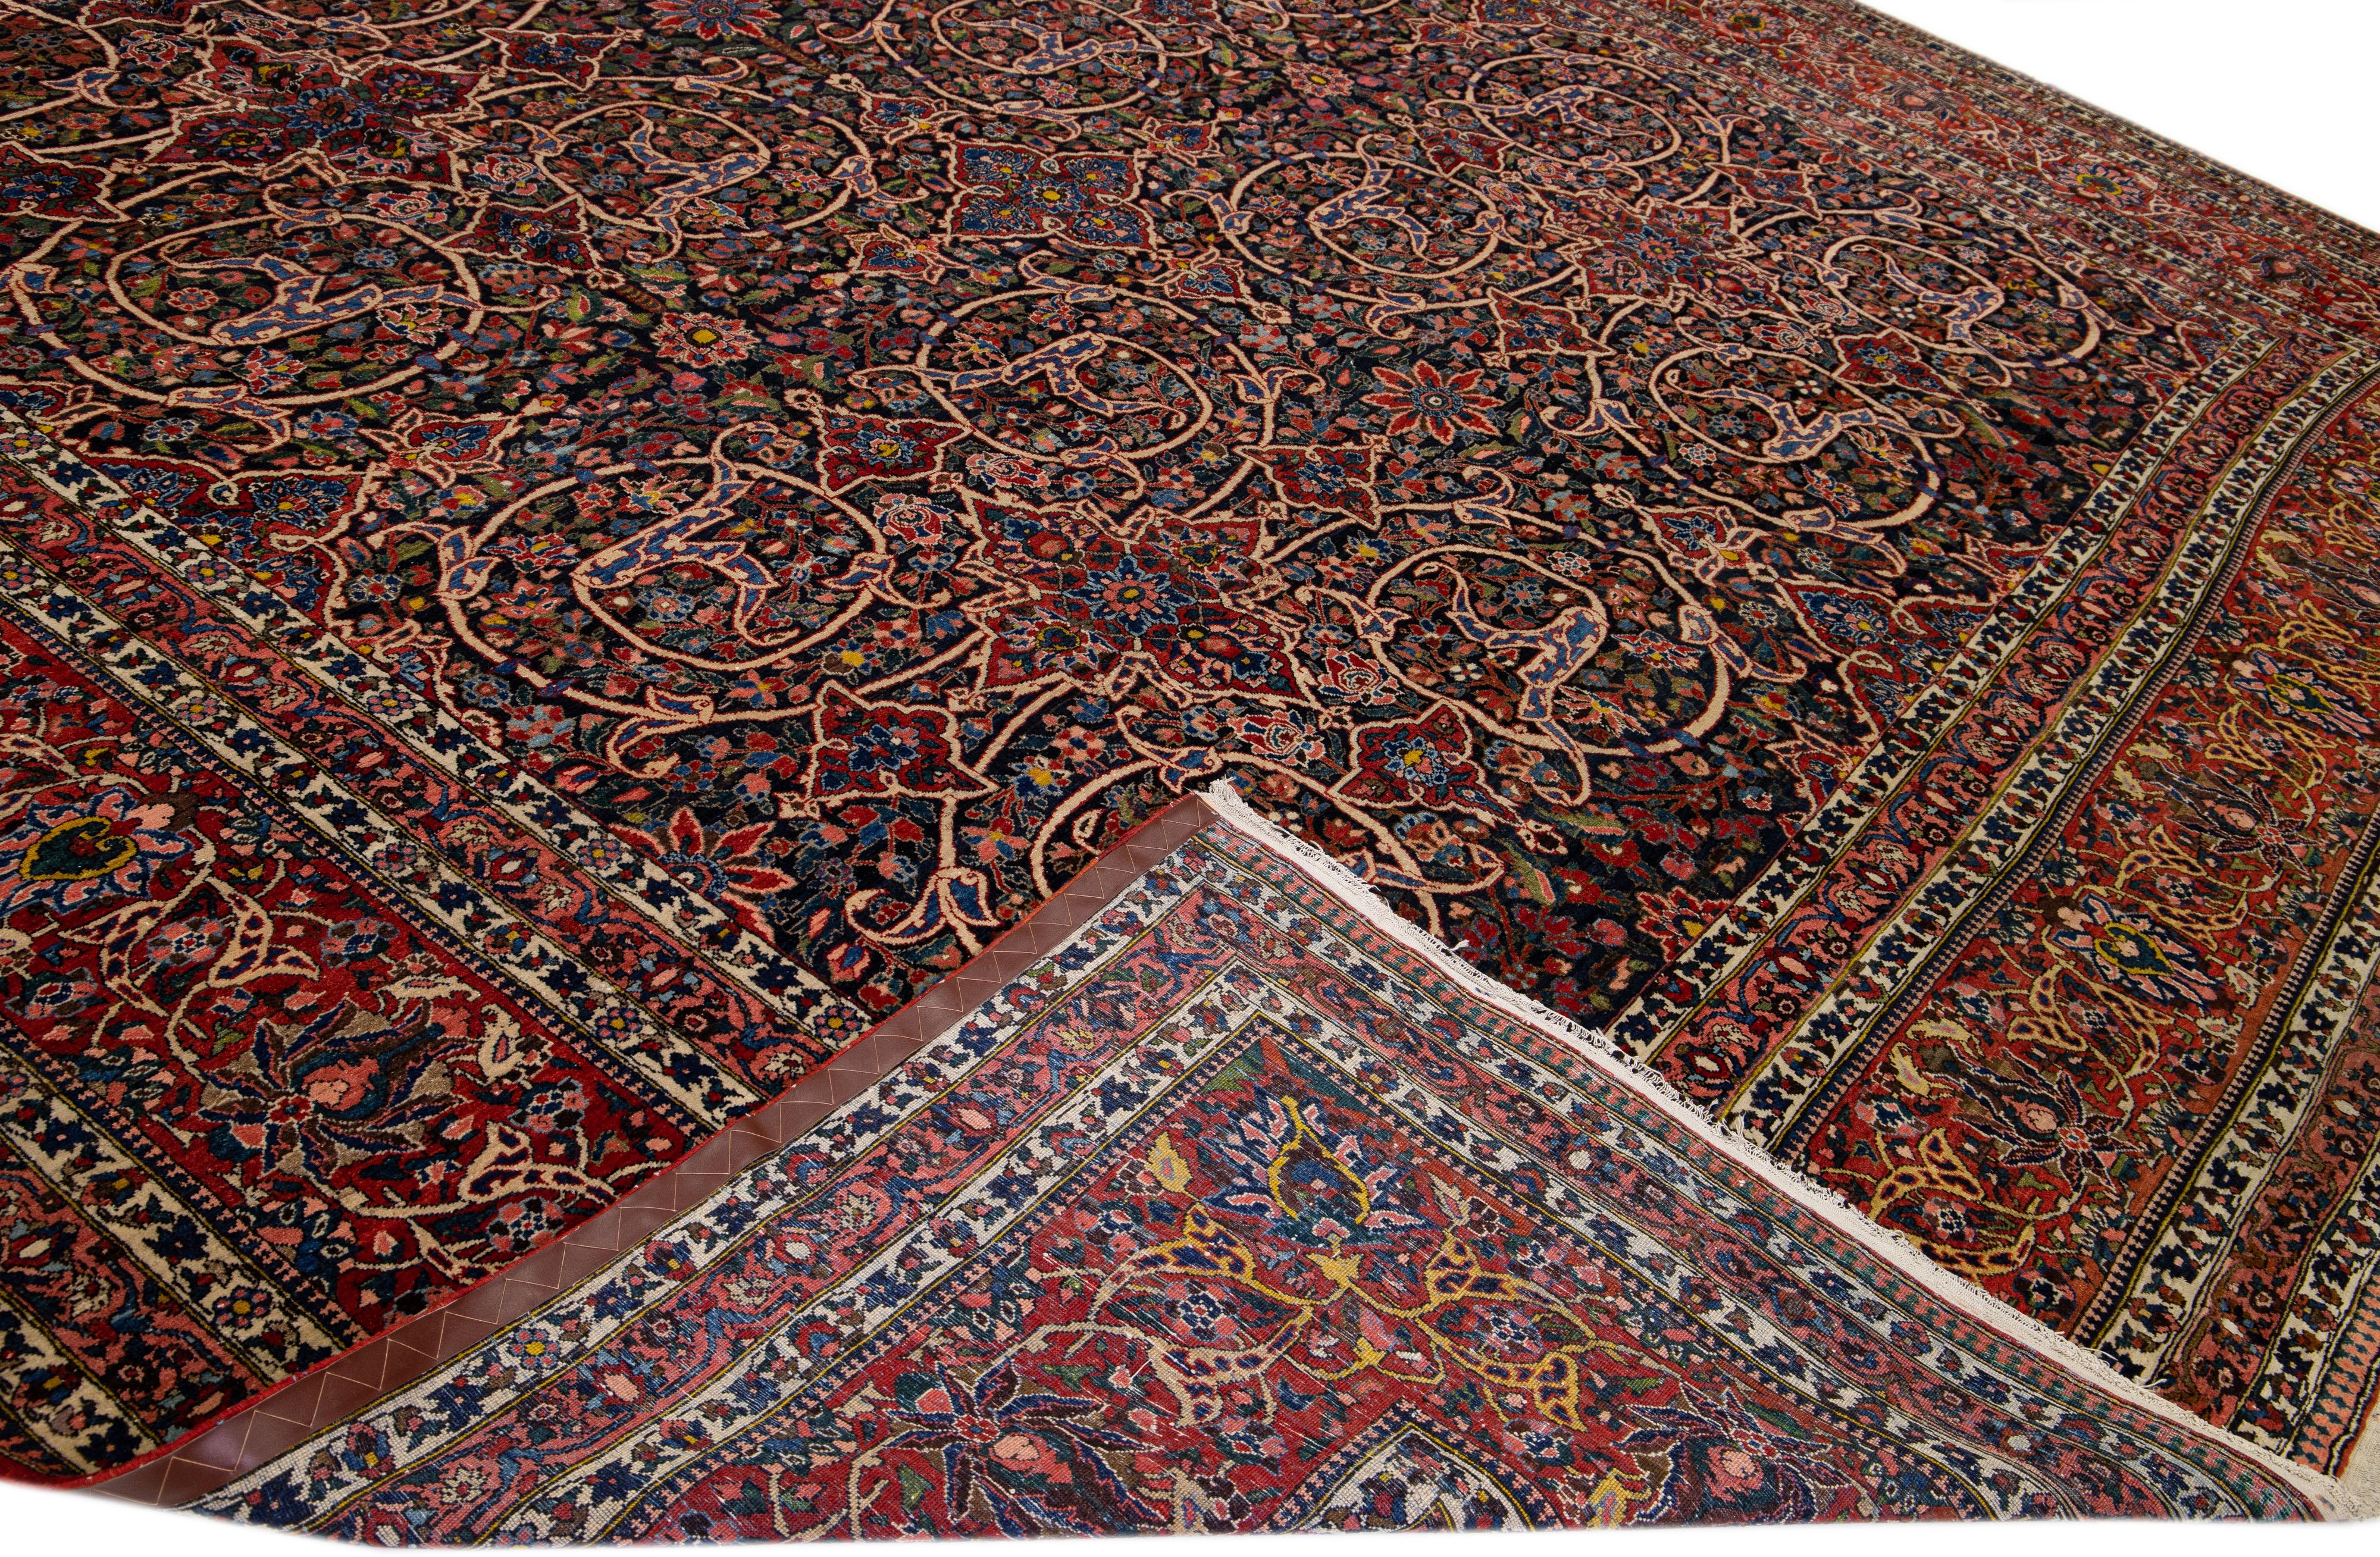 Beautiful antique Bakhtiari hand-knotted wool rug with a dark blue field. This piece has a red-designed frame with multicolor accents on a gorgeous all-over classic floral pattern design.

This rug measures 14'3